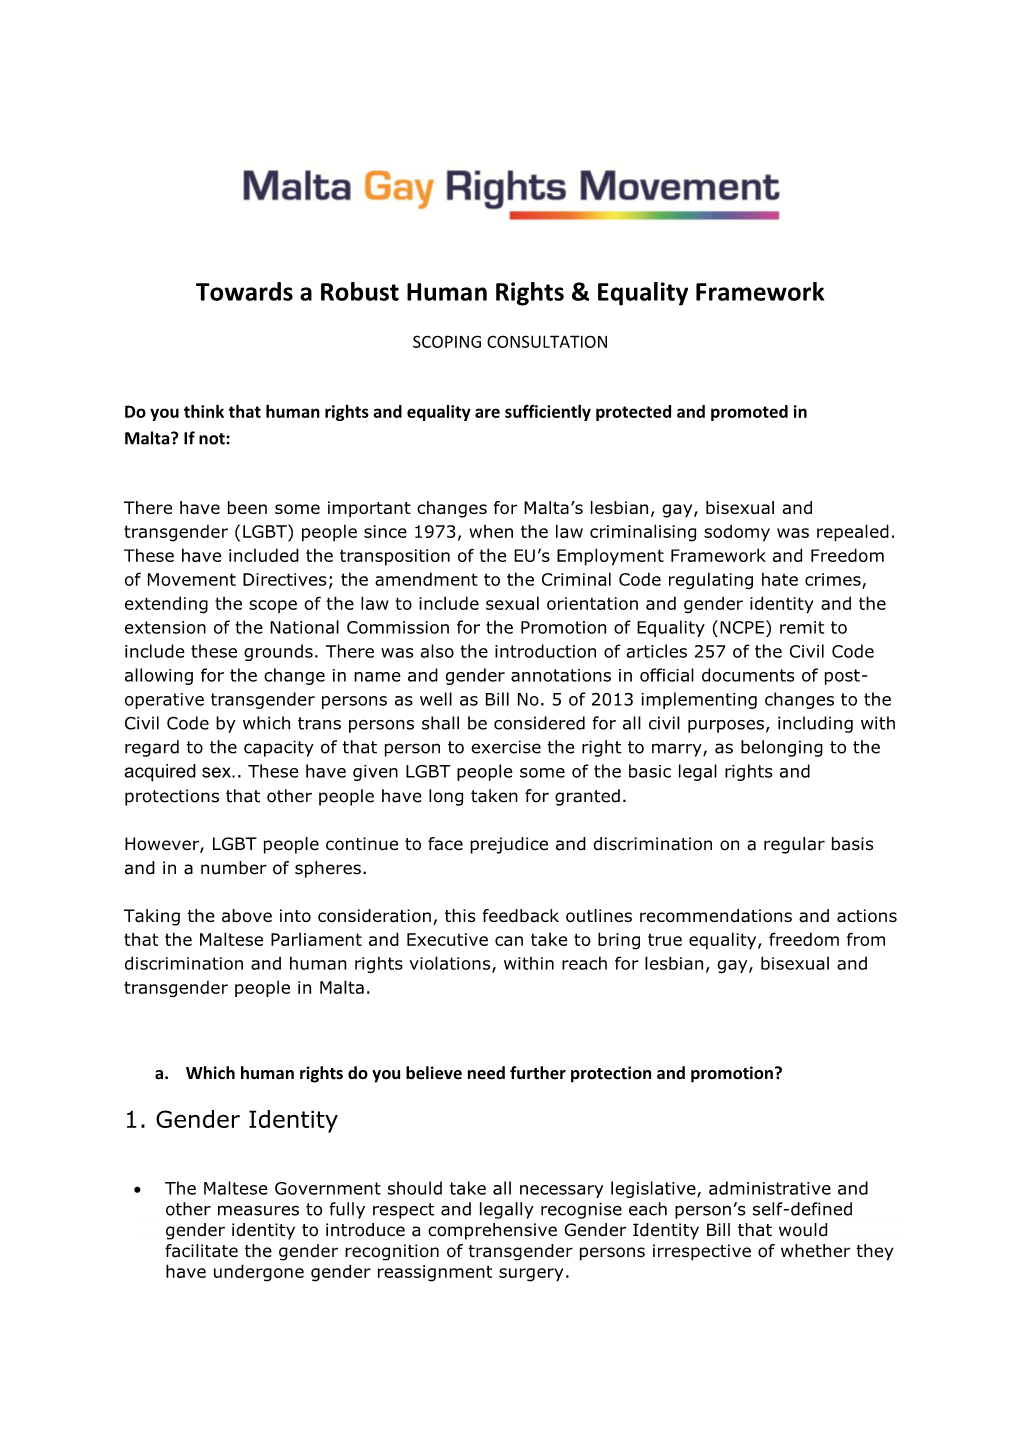 Towards a Robust Human Rights & Equality Framework